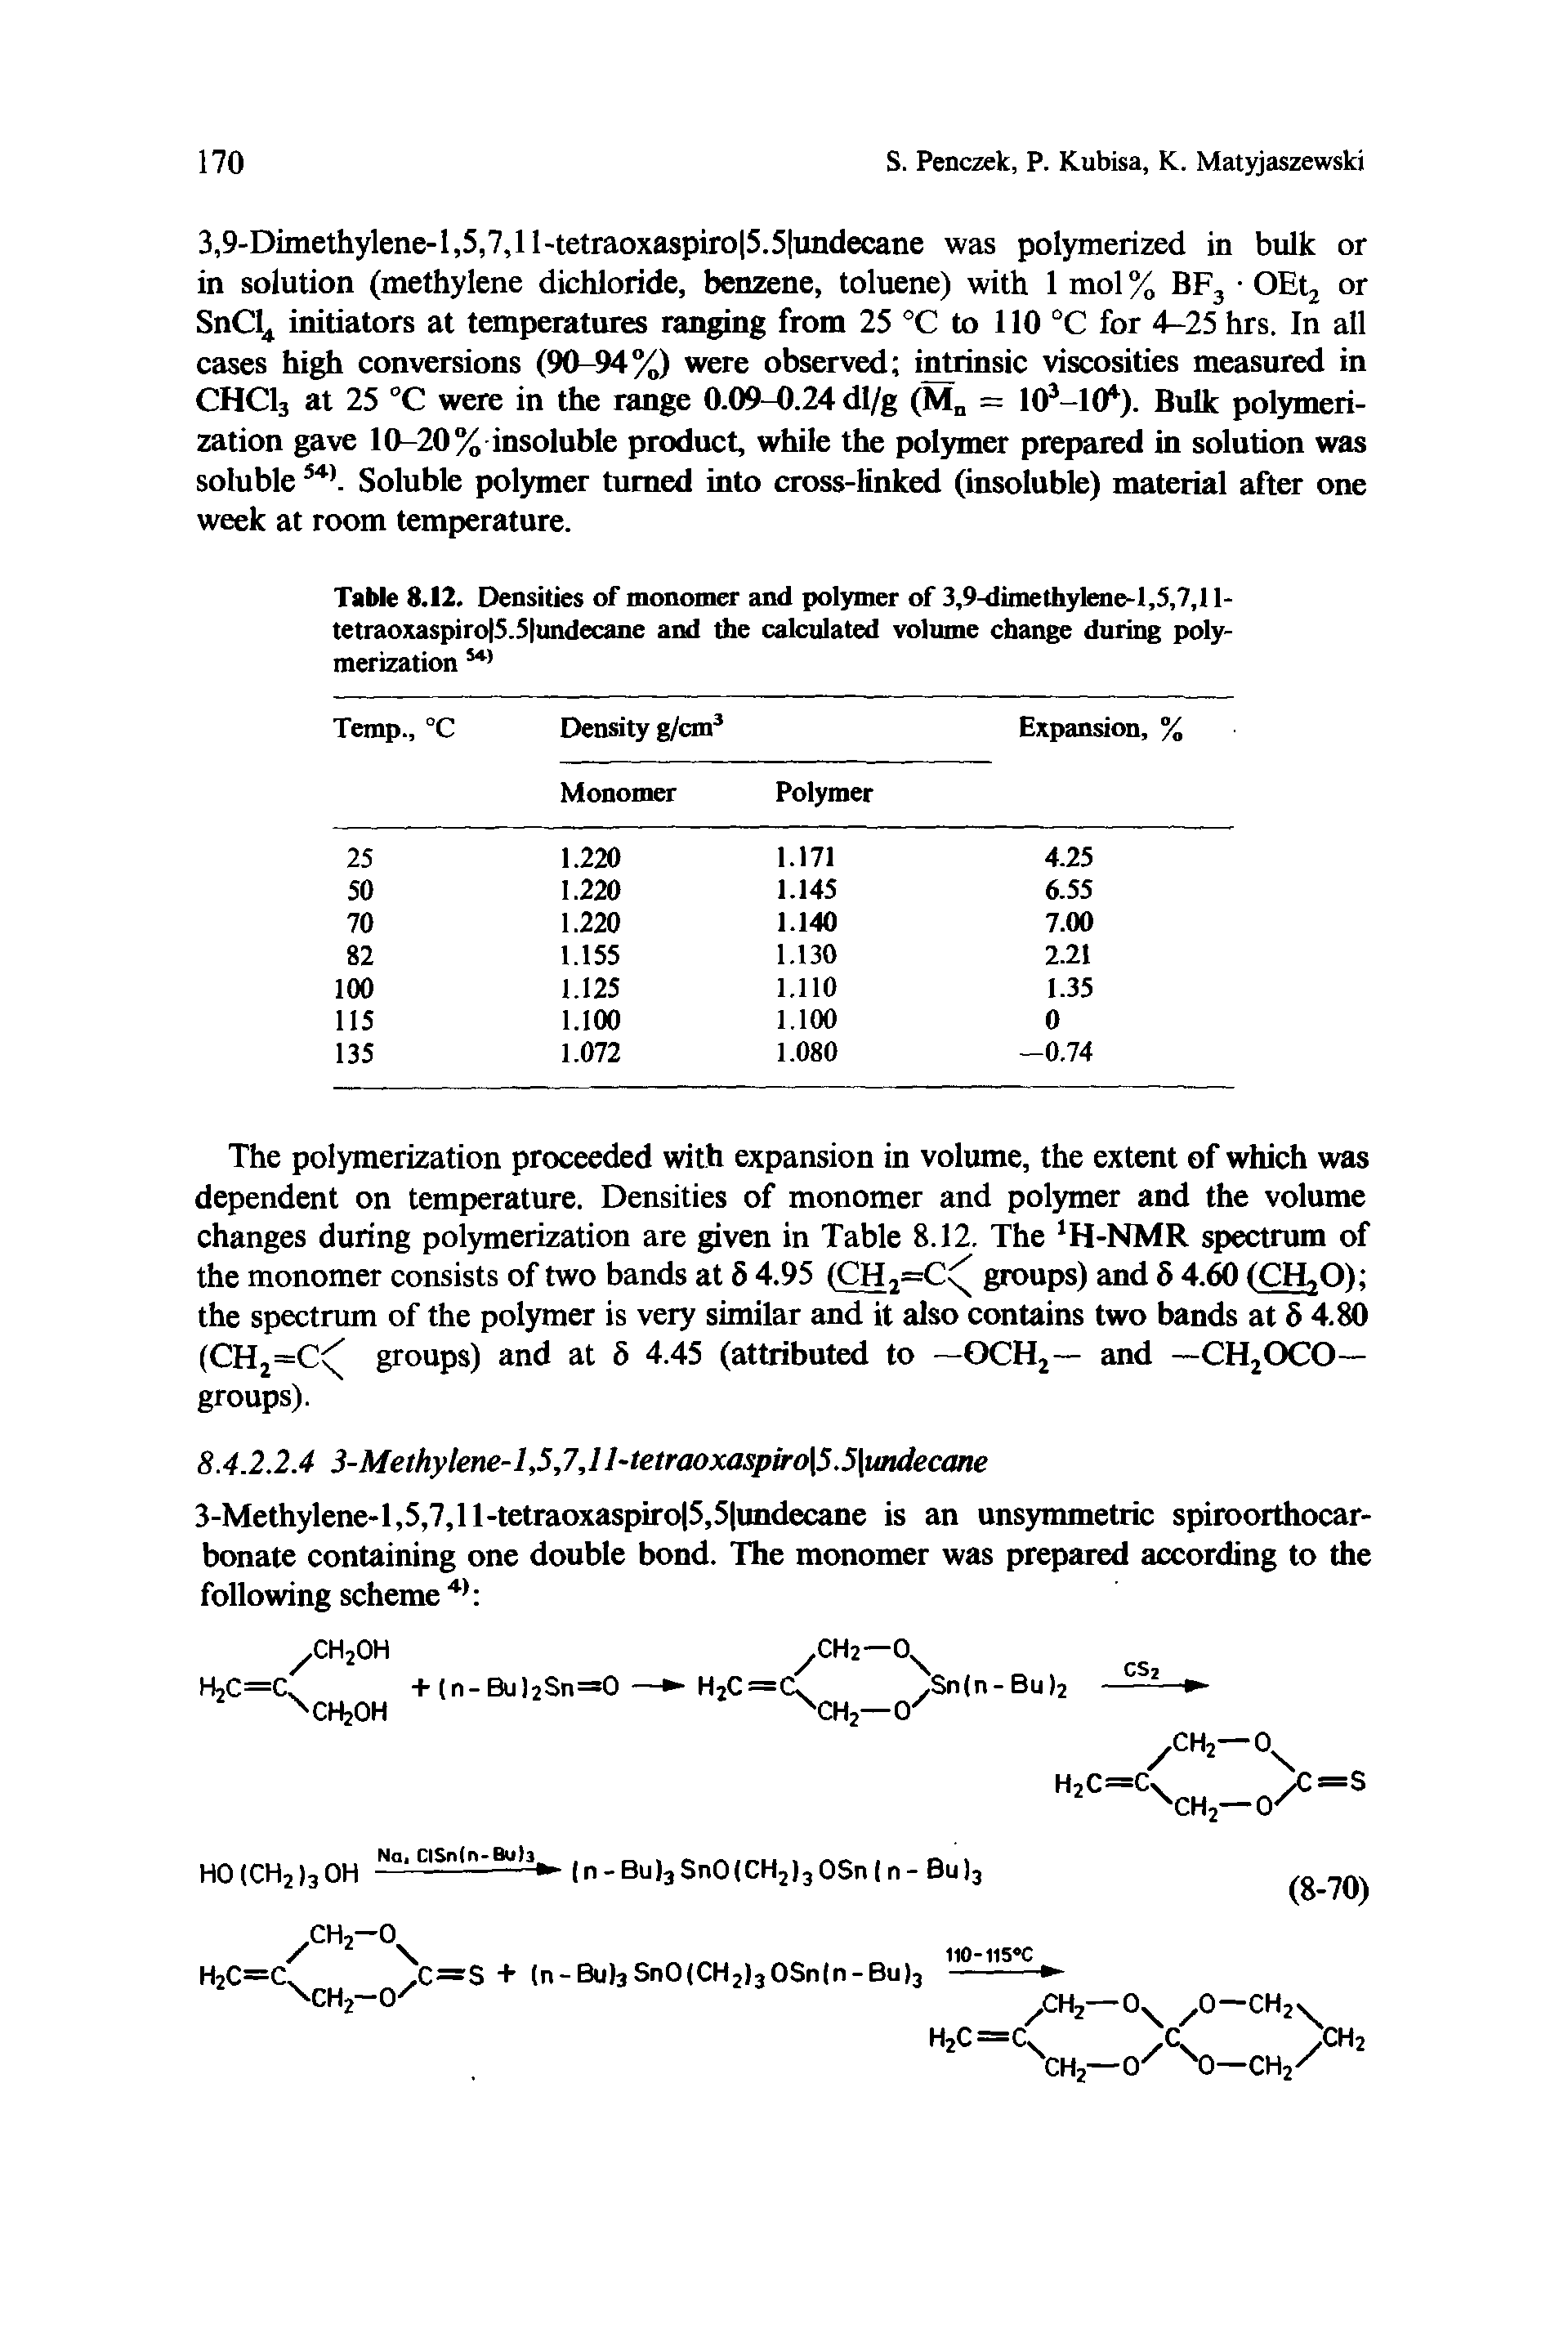 Table 8.12. Densities of monomer and polymer of 3,9-dimethylene-l,5,7,l 1-te traoxaspi ro 5.5 lundecane and the calculated volume change during polymerization 541...